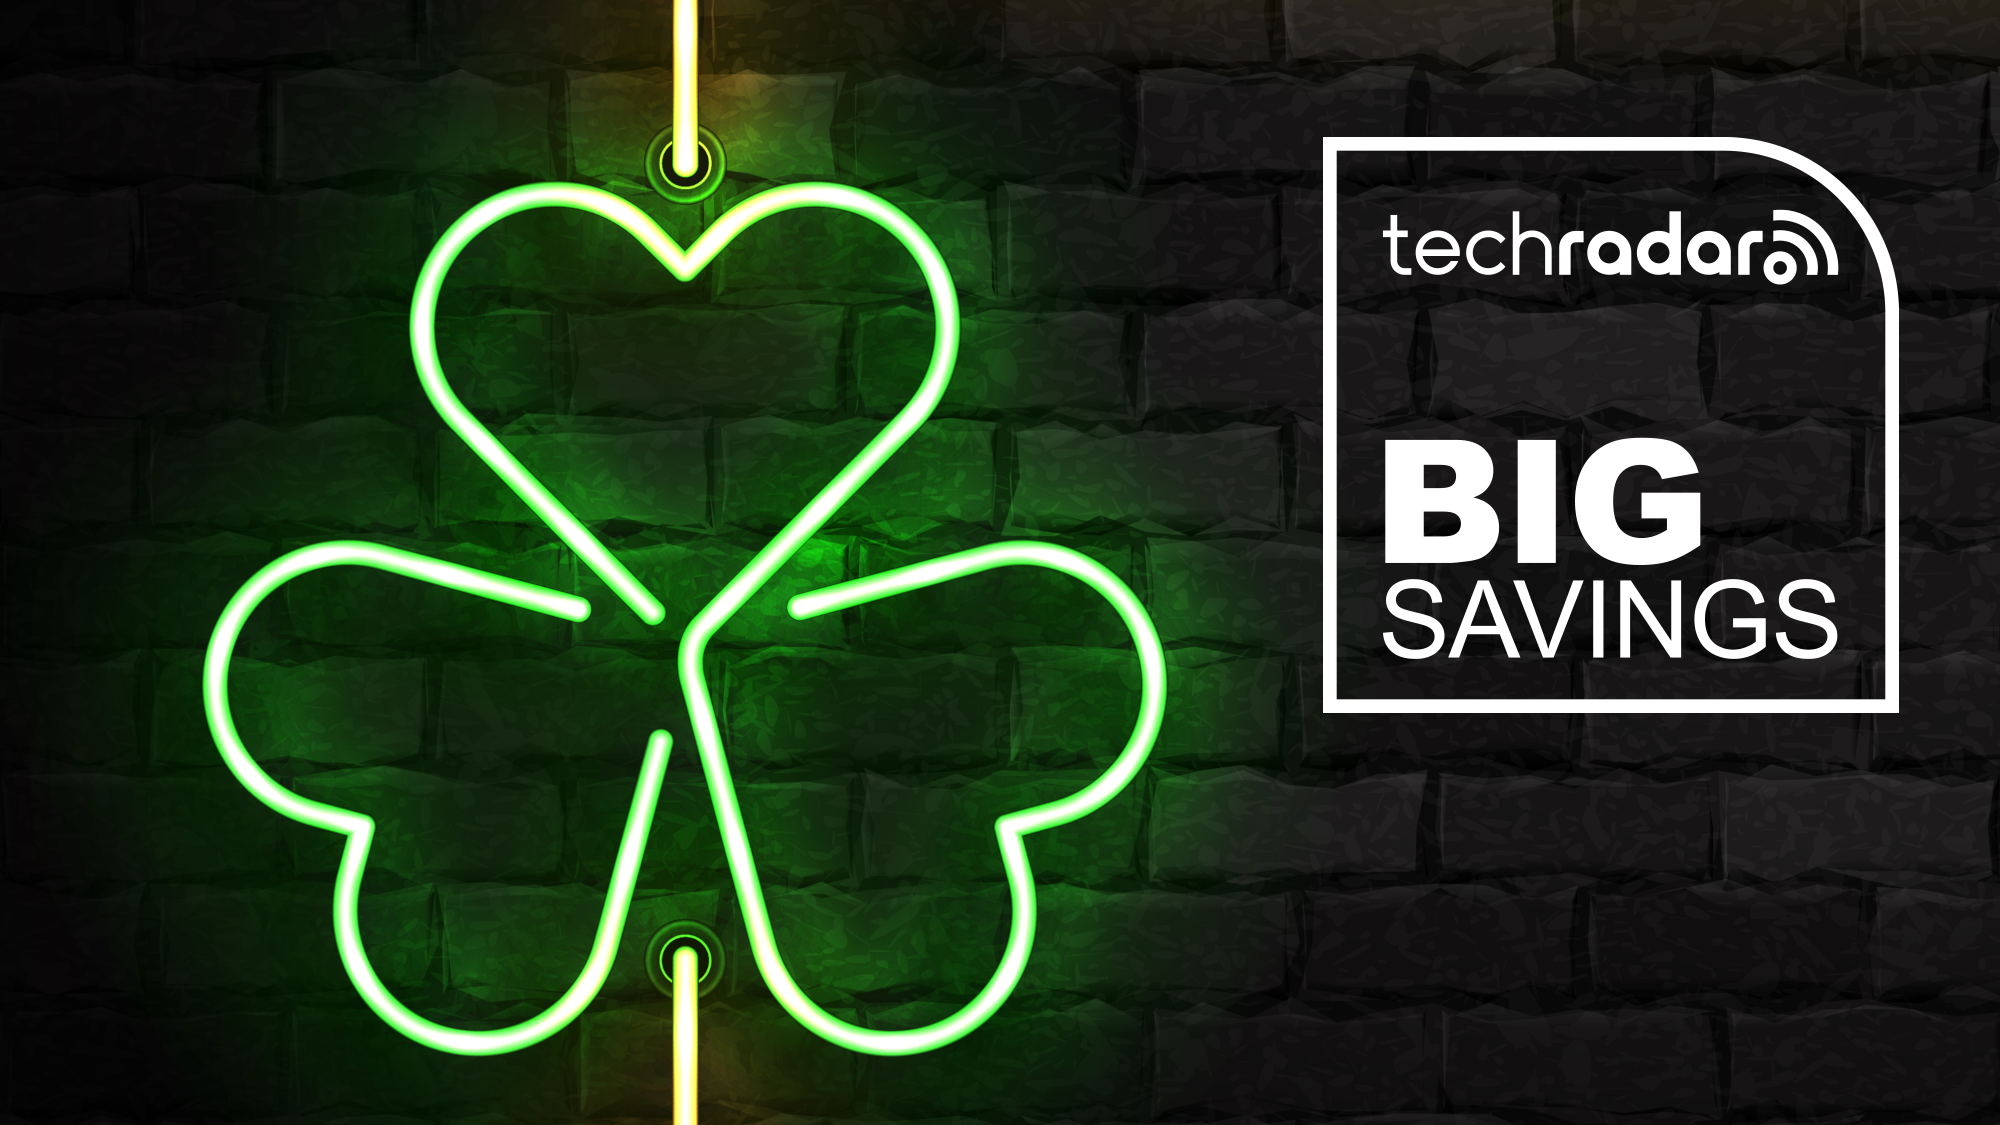 Lucky you: Amazon just launched a huge St. Patrick's Day sale - shop the 13 best deals